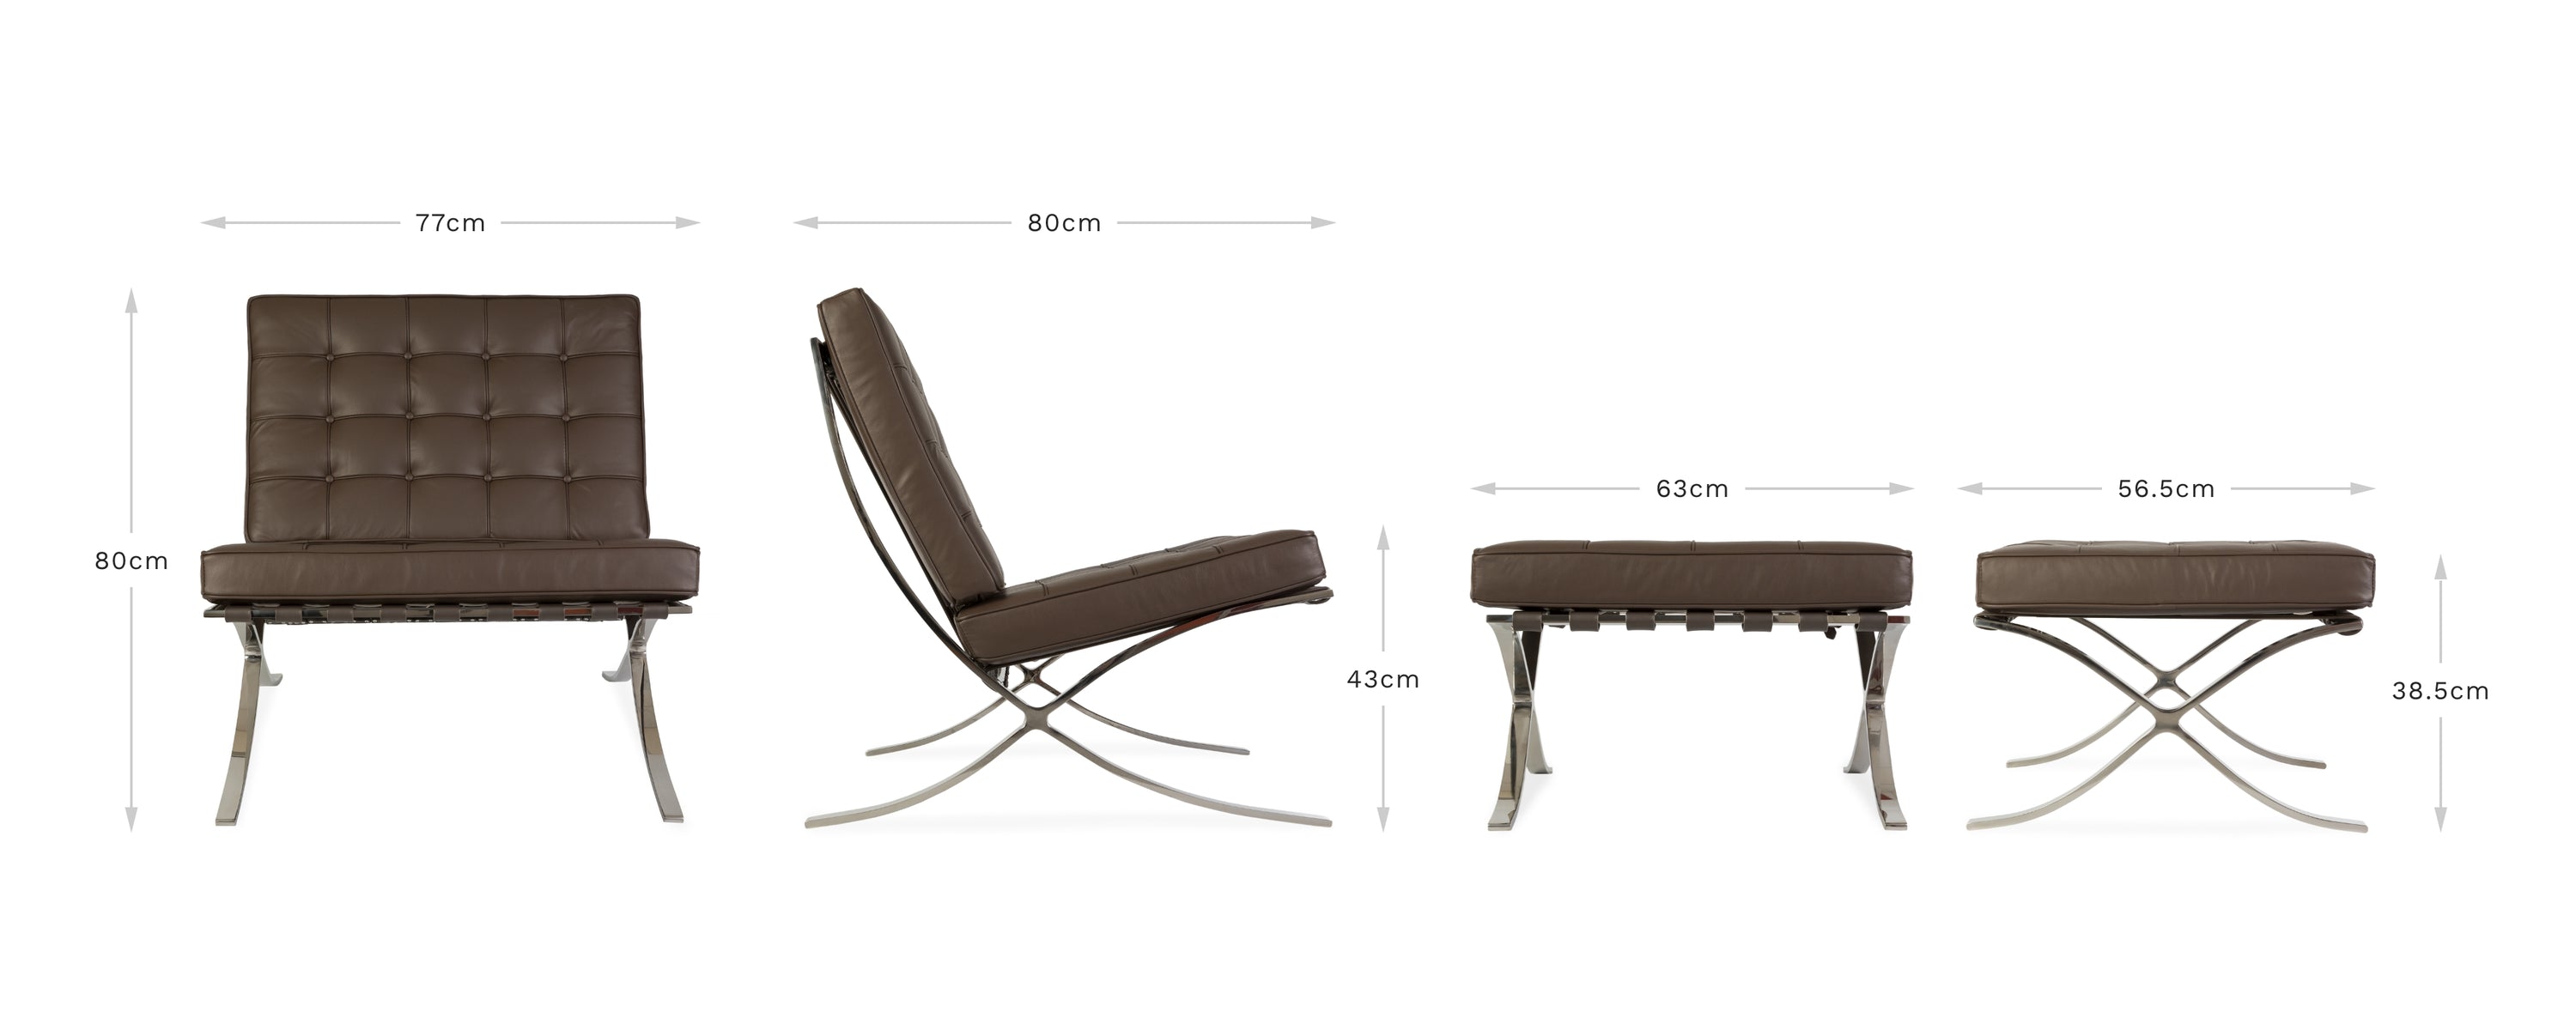 View of front and side of the brown leather Barcelona Pavilion chair and ottoman on a white background displaying the dimensions